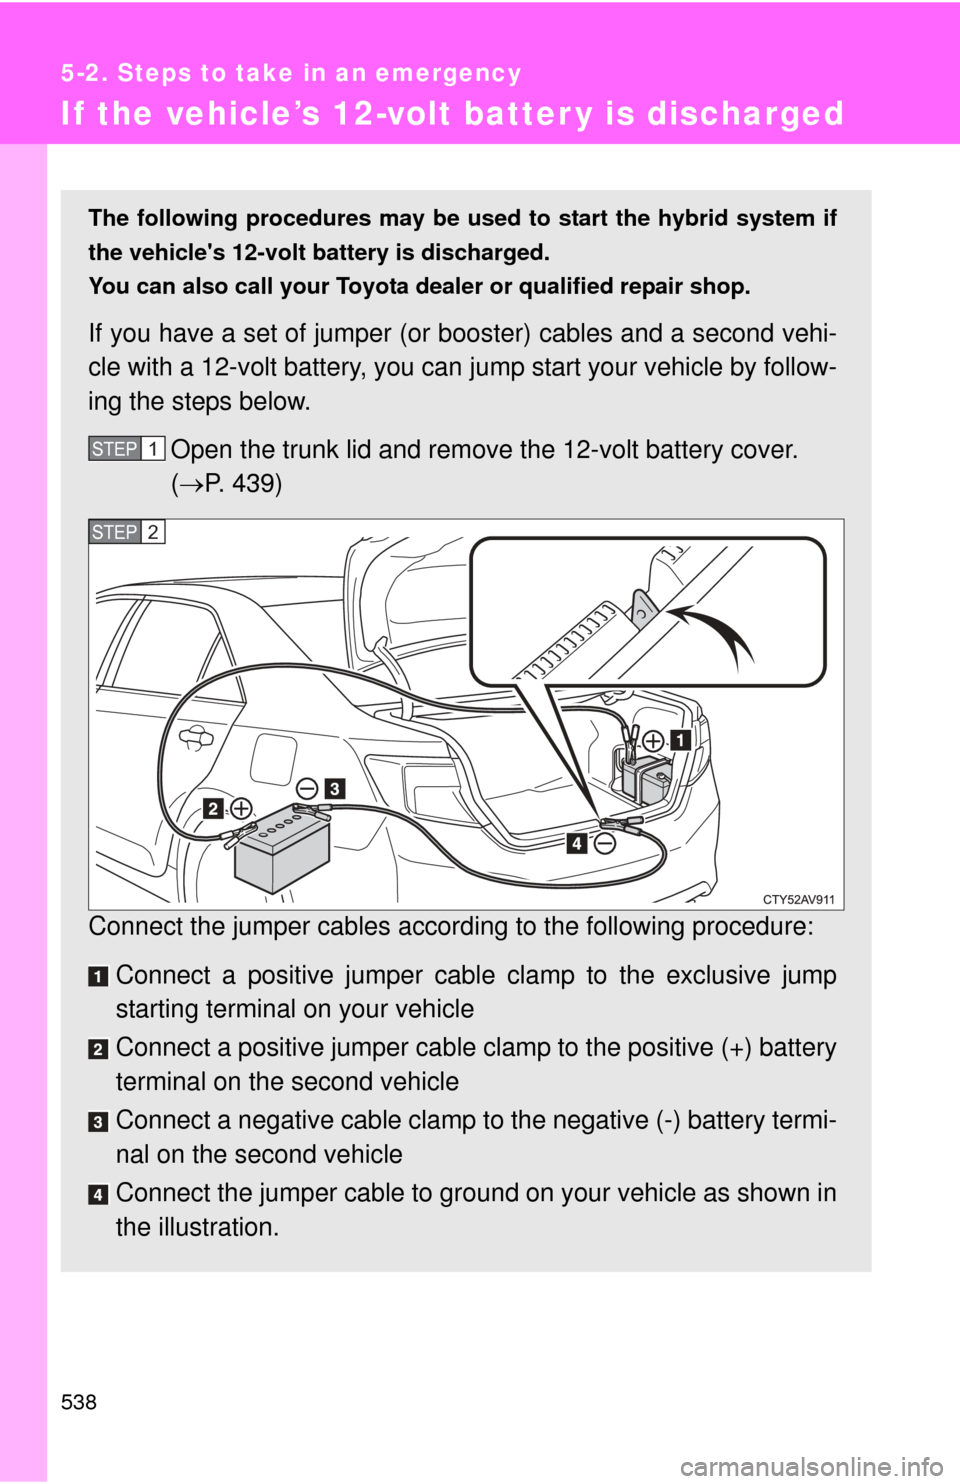 TOYOTA CAMRY HYBRID 2014 XV50 / 9.G Owners Manual 538
5-2. Steps to take in an emergency
If the vehicle’s 12-volt batter y is discharged
The following procedures may be used to start the hybrid system if
the vehicles 12-volt battery is discharged.